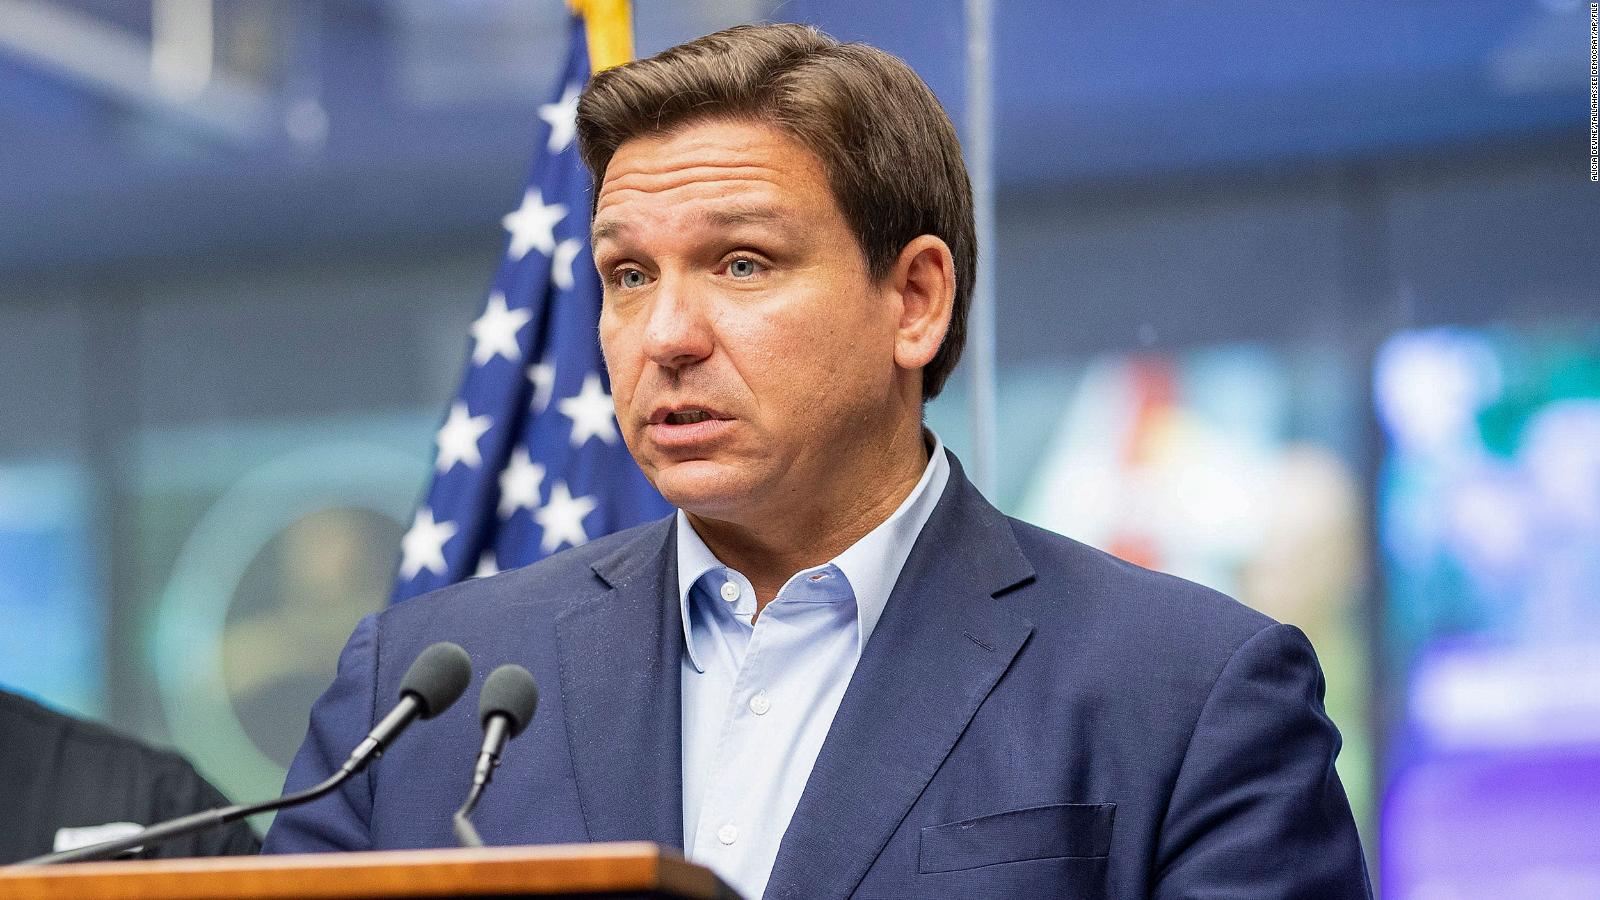 Florida contracts 3 private companies for DeSantis’ program that seeks to relocate migrants